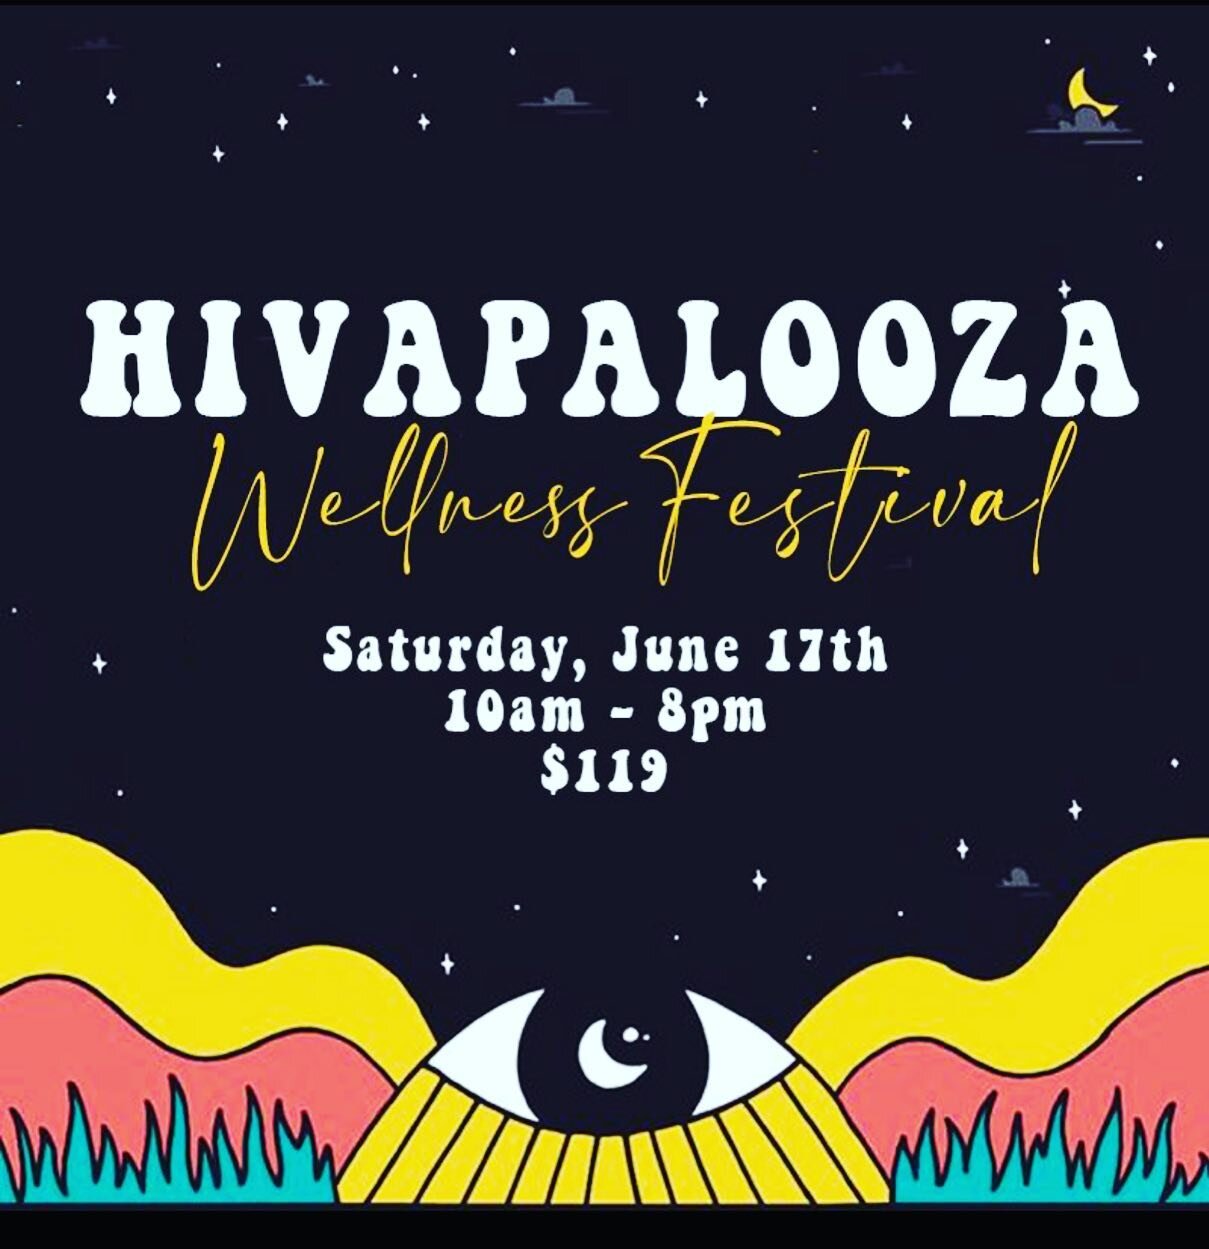 ✨HIVAPALOOZA FEST✨
Saturday, June 17th
10am-8pm

Celebrate Summer Solstice and explore all things wellness while having fun with the Hive Tribe during our first wellness festival!

&bull;practice&bull;explore&bull;listen&bull;celebrate&bull;

Break f